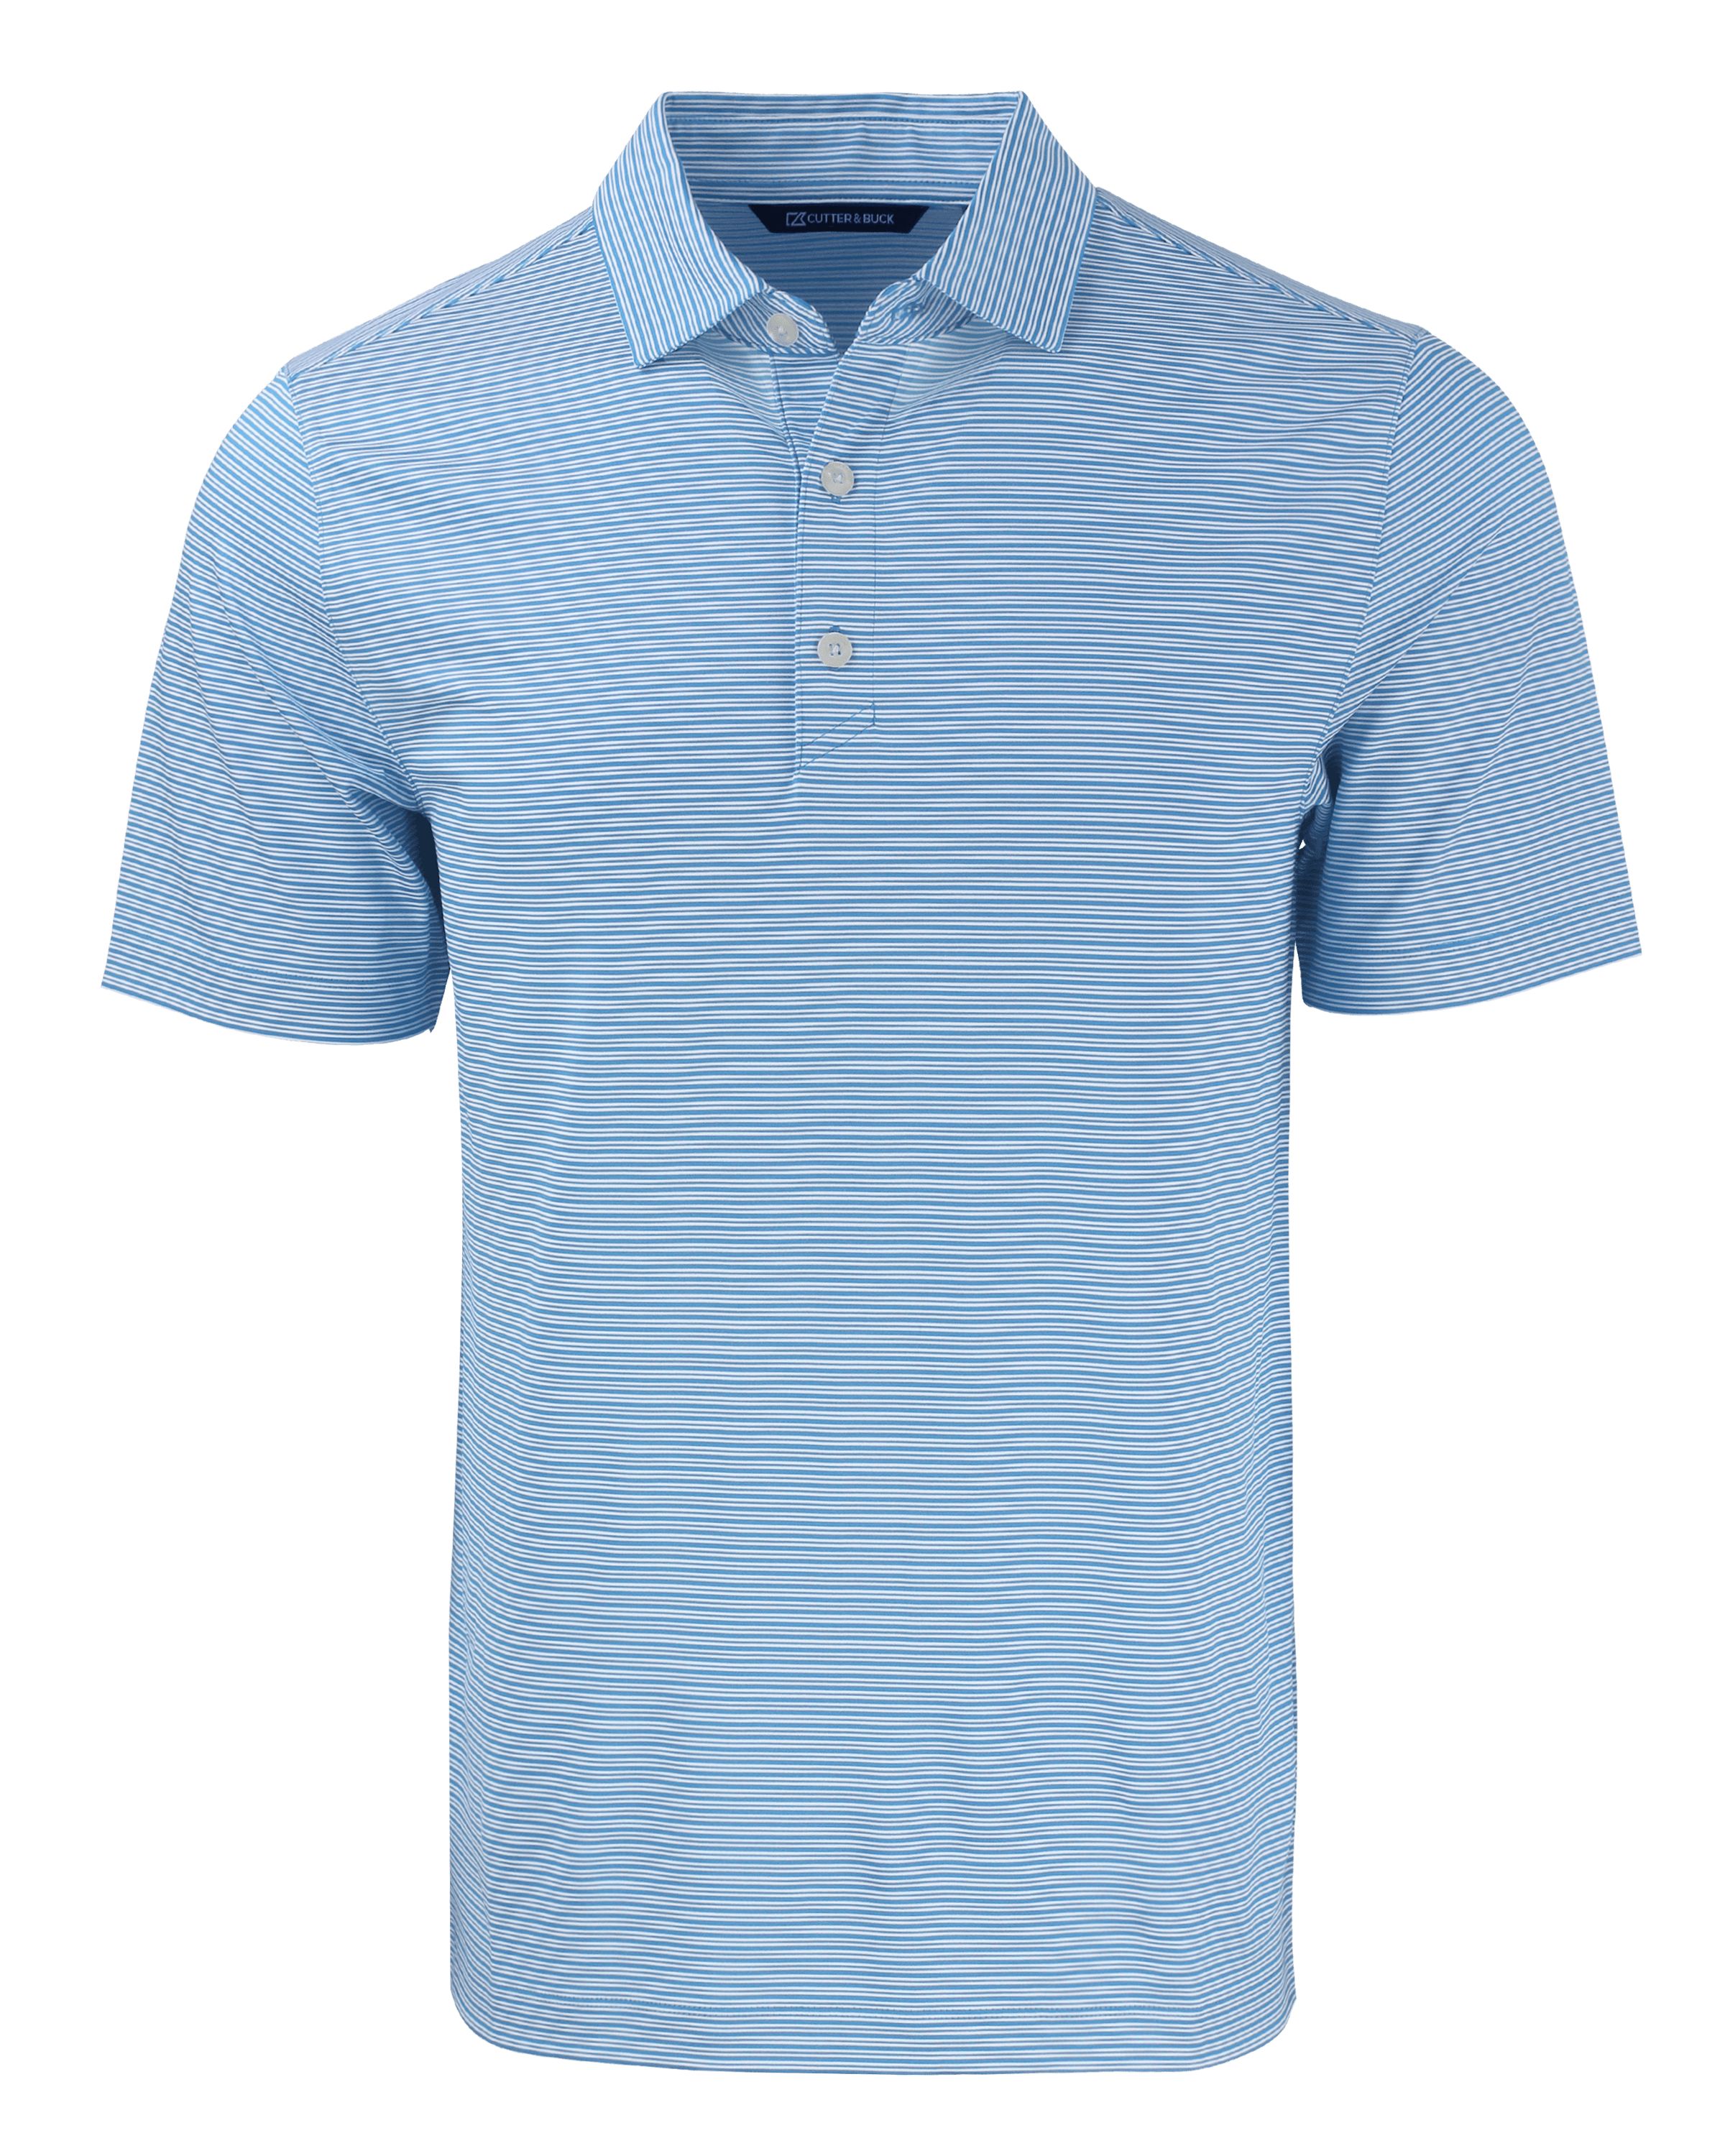 CUTTER & BUCK MCK01302 - Men's Forge Eco Double Stripe Stretch Recycled Polo